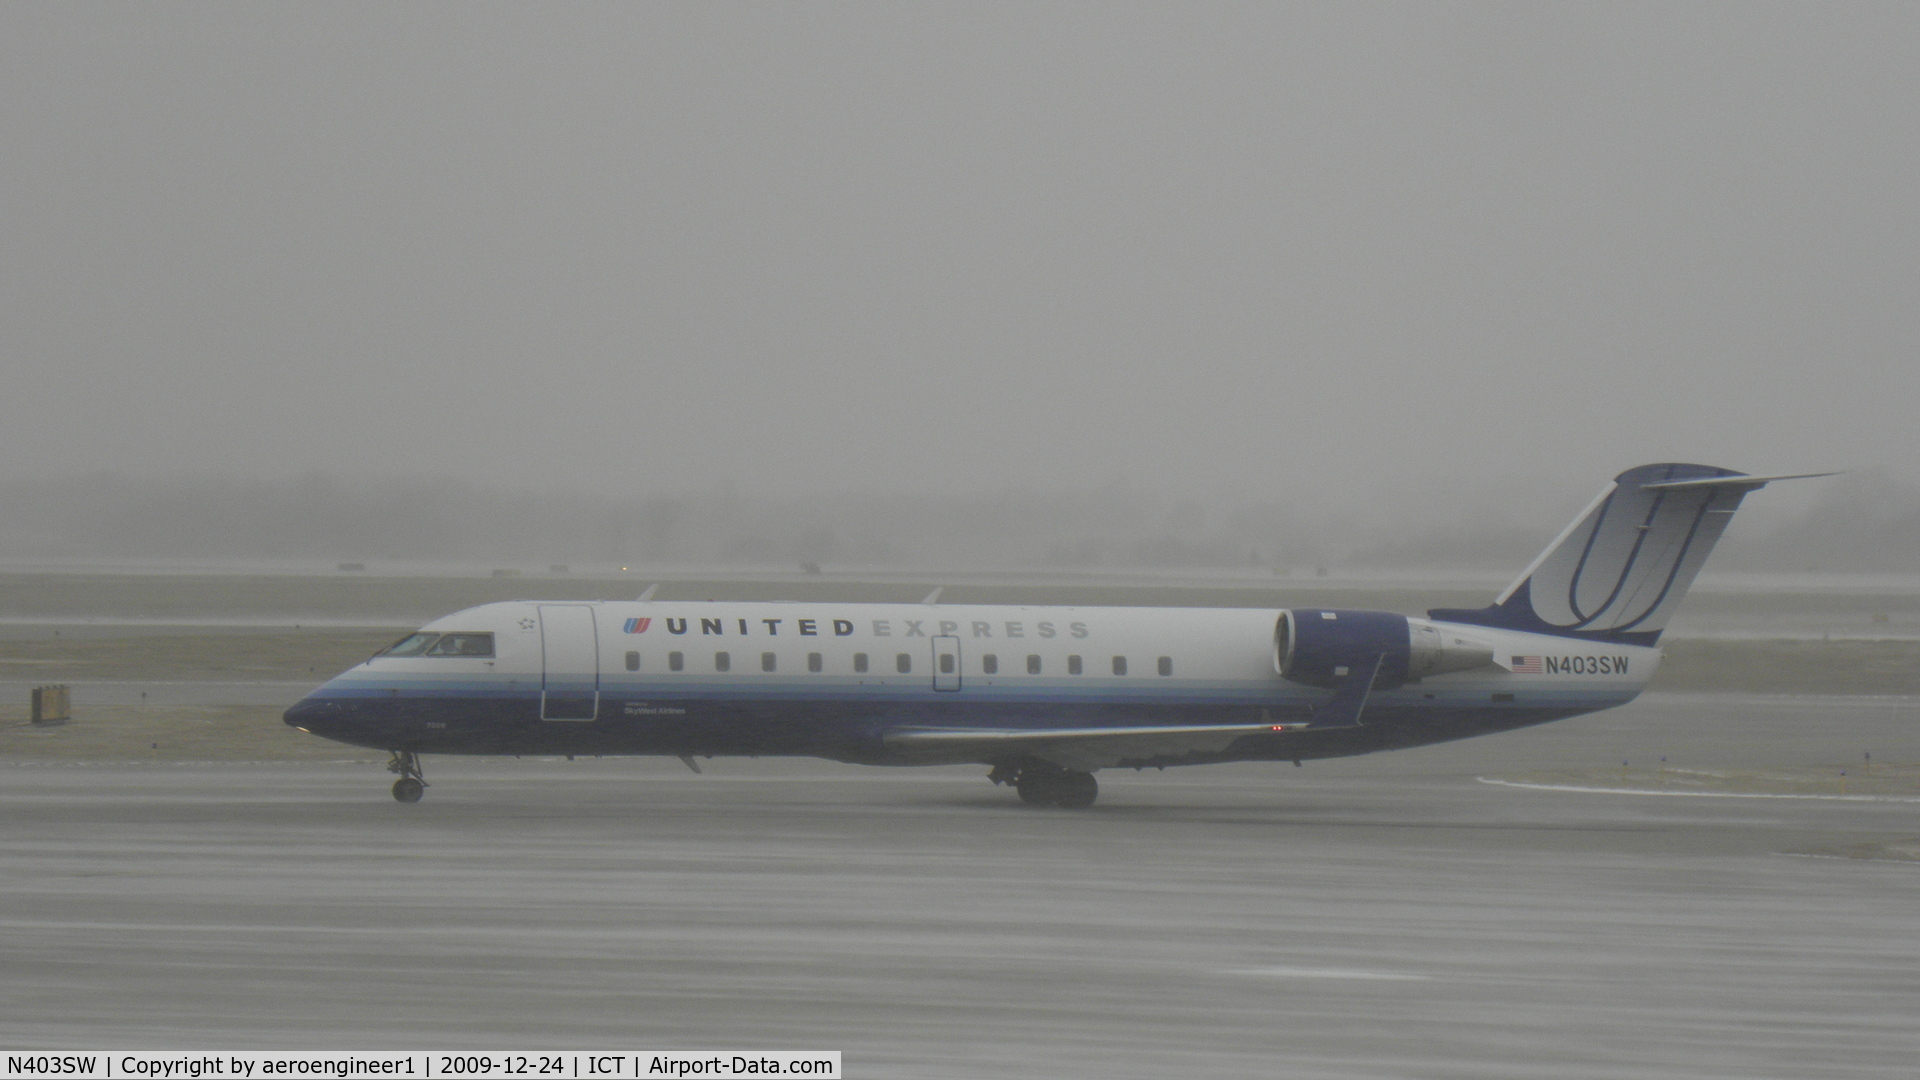 N403SW, 1993 Canadair CRJ-100LR (CL-600-2B19) C/N 7028, UA6018 (N403SW) is arriving to ICT from ORD on Christmas Eve...